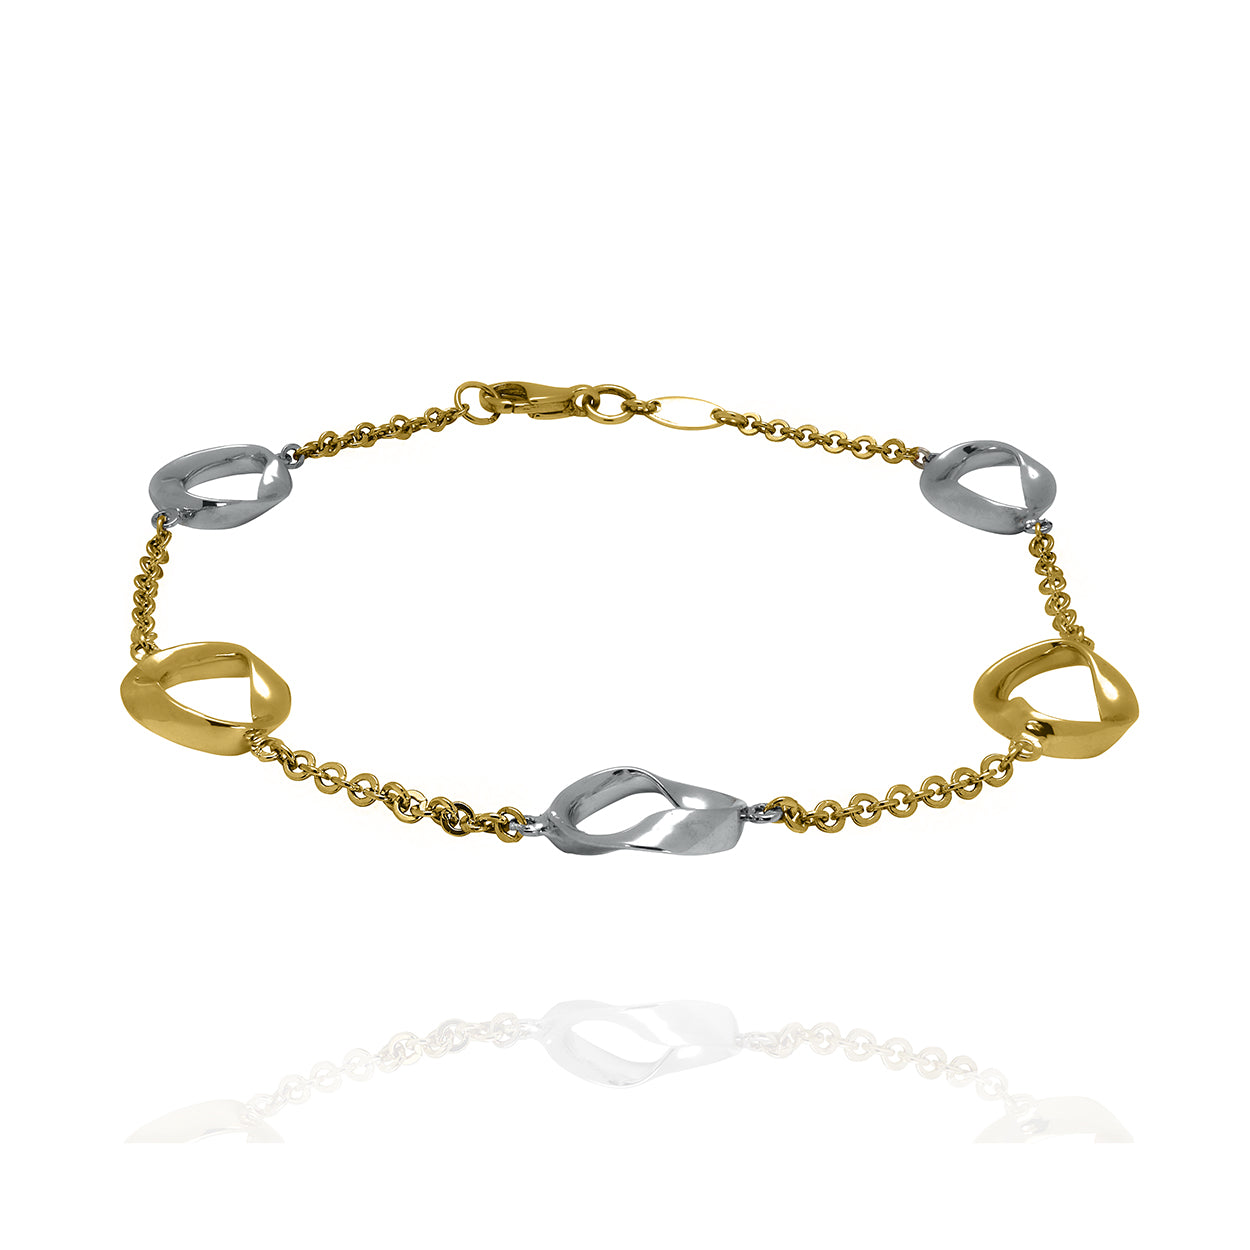 10kt Yellow and White Gold Bracelet with 5 Oval Links attached to a cable style chain